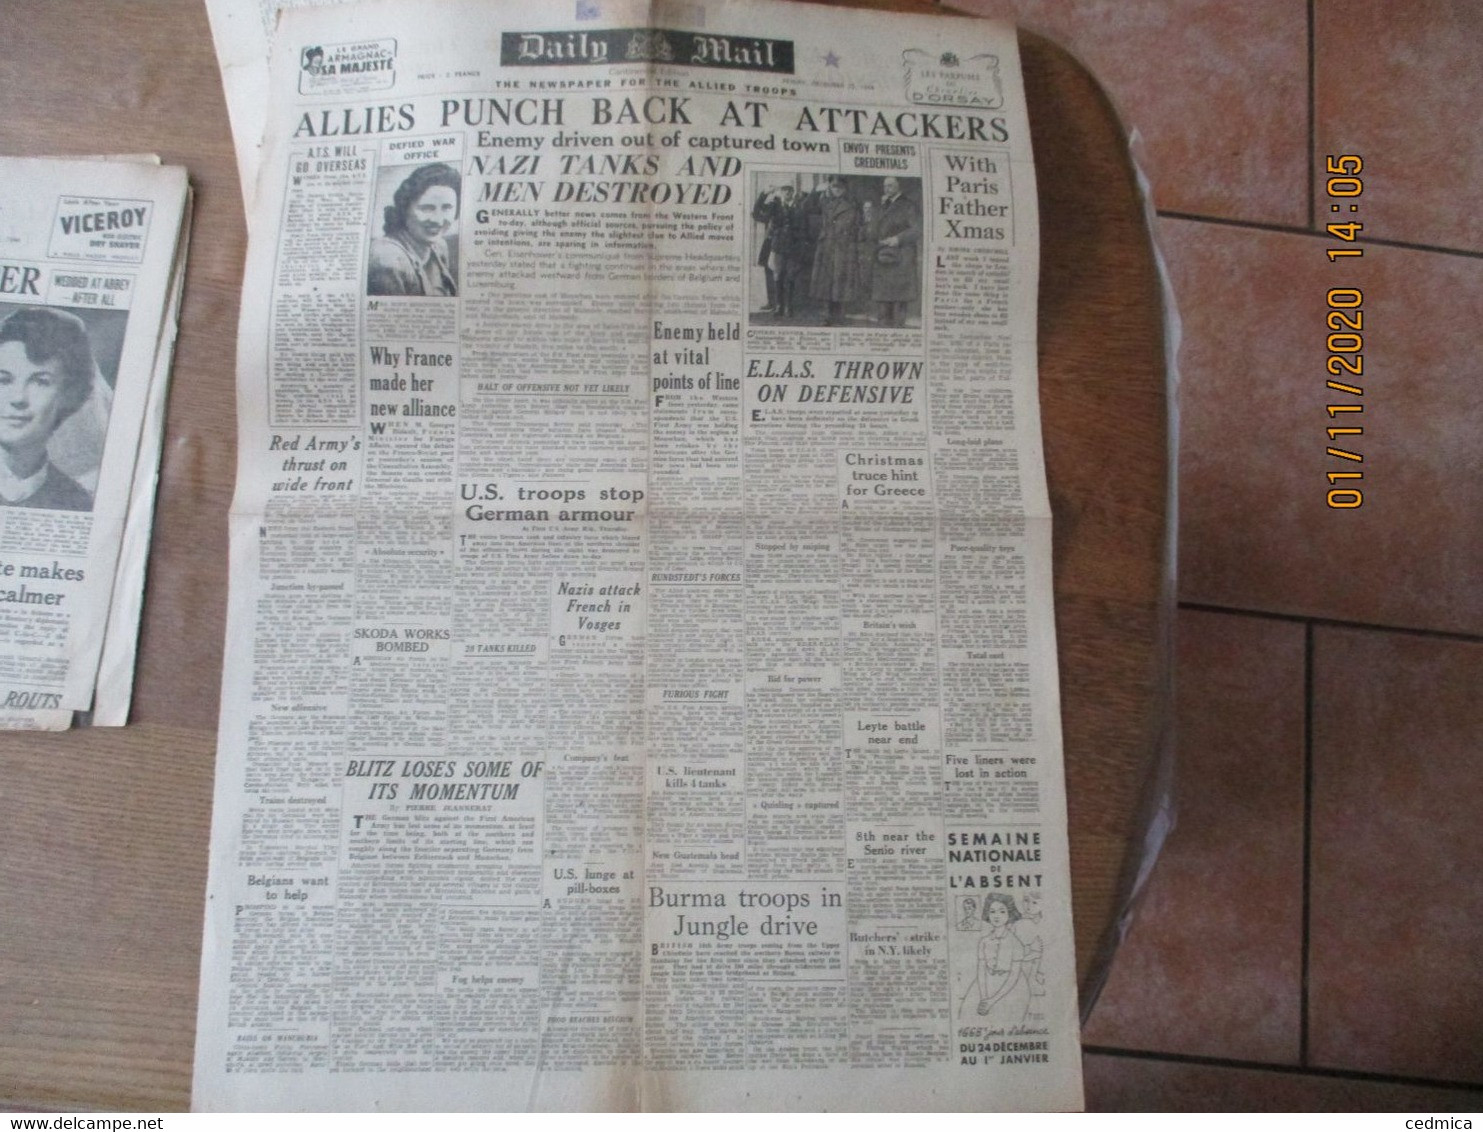 DAILY MAIL FRIDAY DECEMBER 22.1944 THE NEWSPAPER FOR THE ALLIED TROOPS - Weltkrieg 1939-45